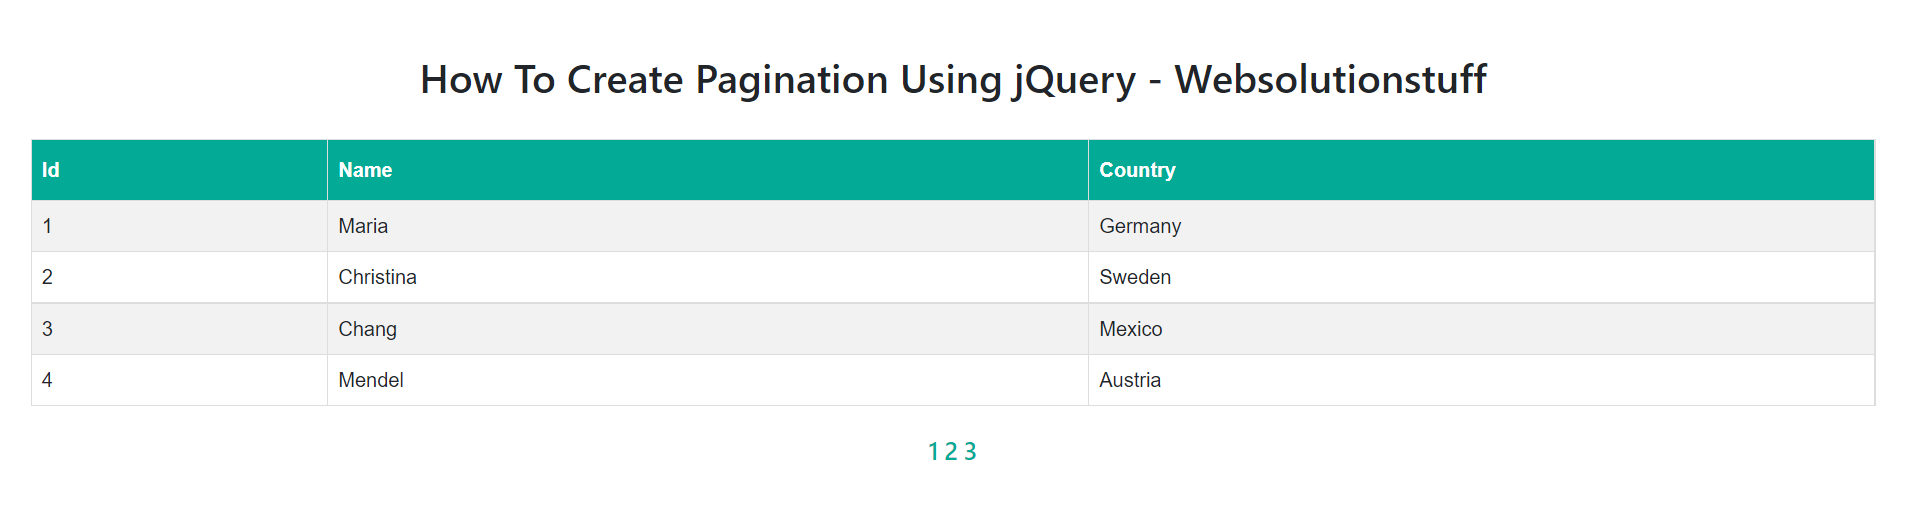 how_to_create_pagination_using_jquery_and_bootstrap